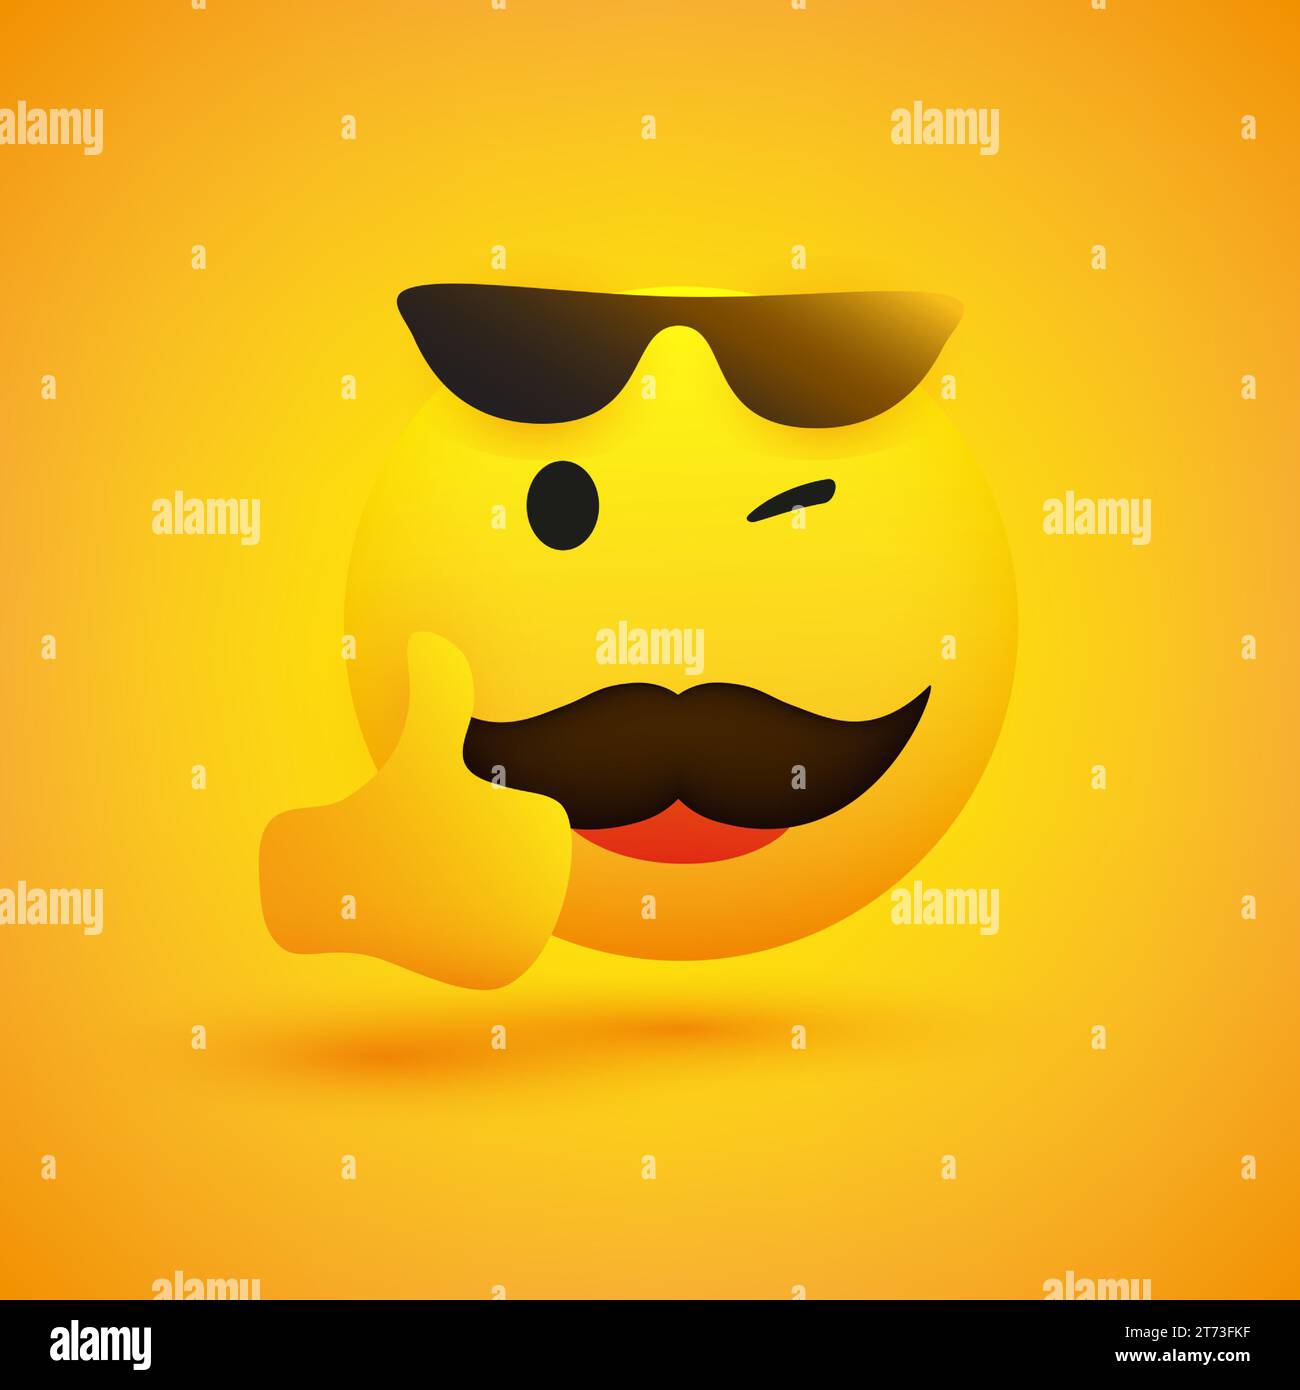 Smiling Emoji - Simple Happy Winking Yellow  Emoticon with Mustache and Sunglasses Showing Thumbs Up - Vector Design for Web and Instant Messaging App Stock Vector